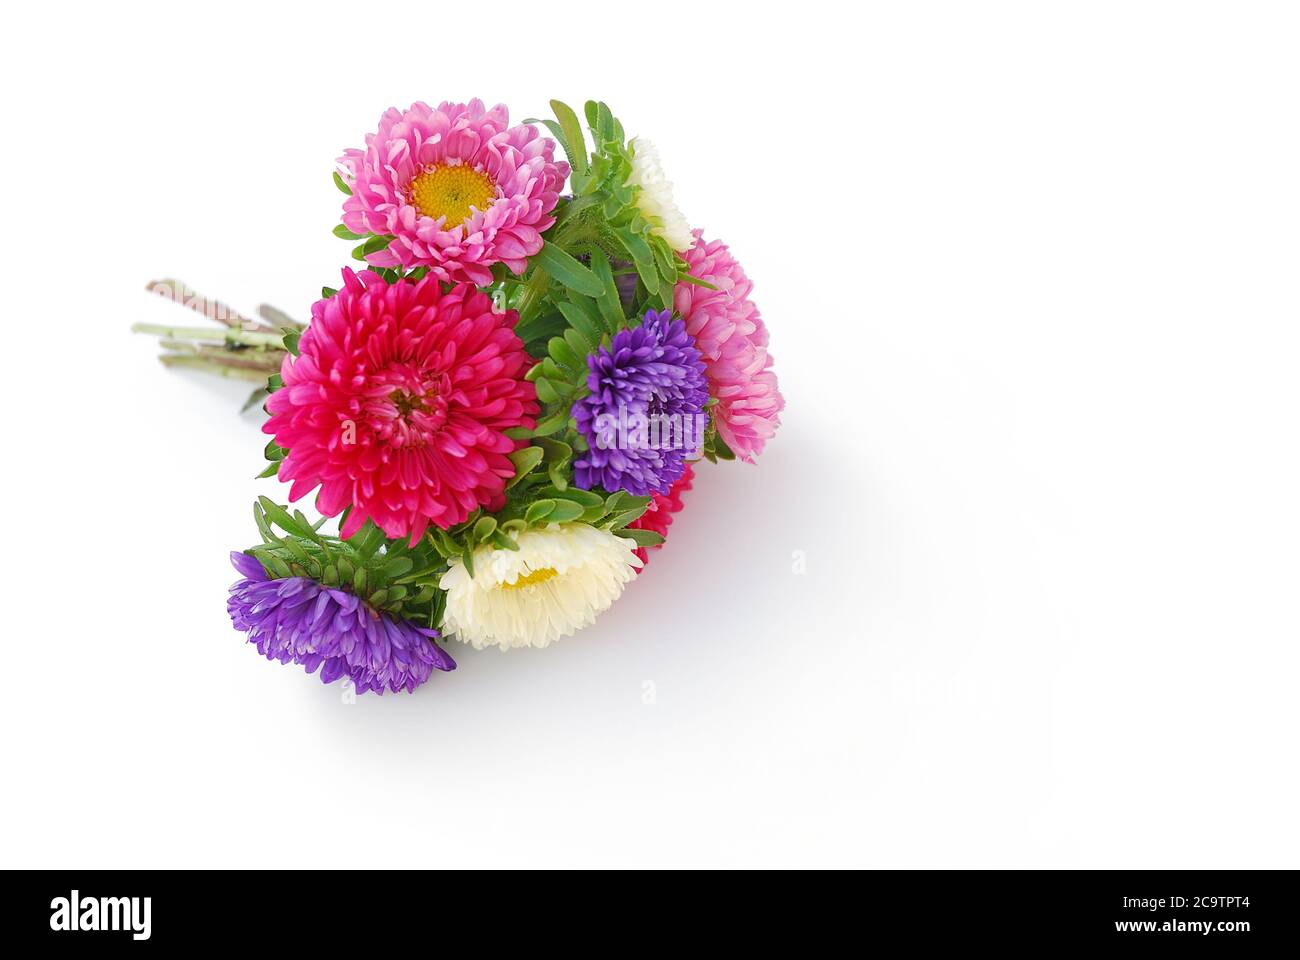 isolated flower lies on white background Stock Photo